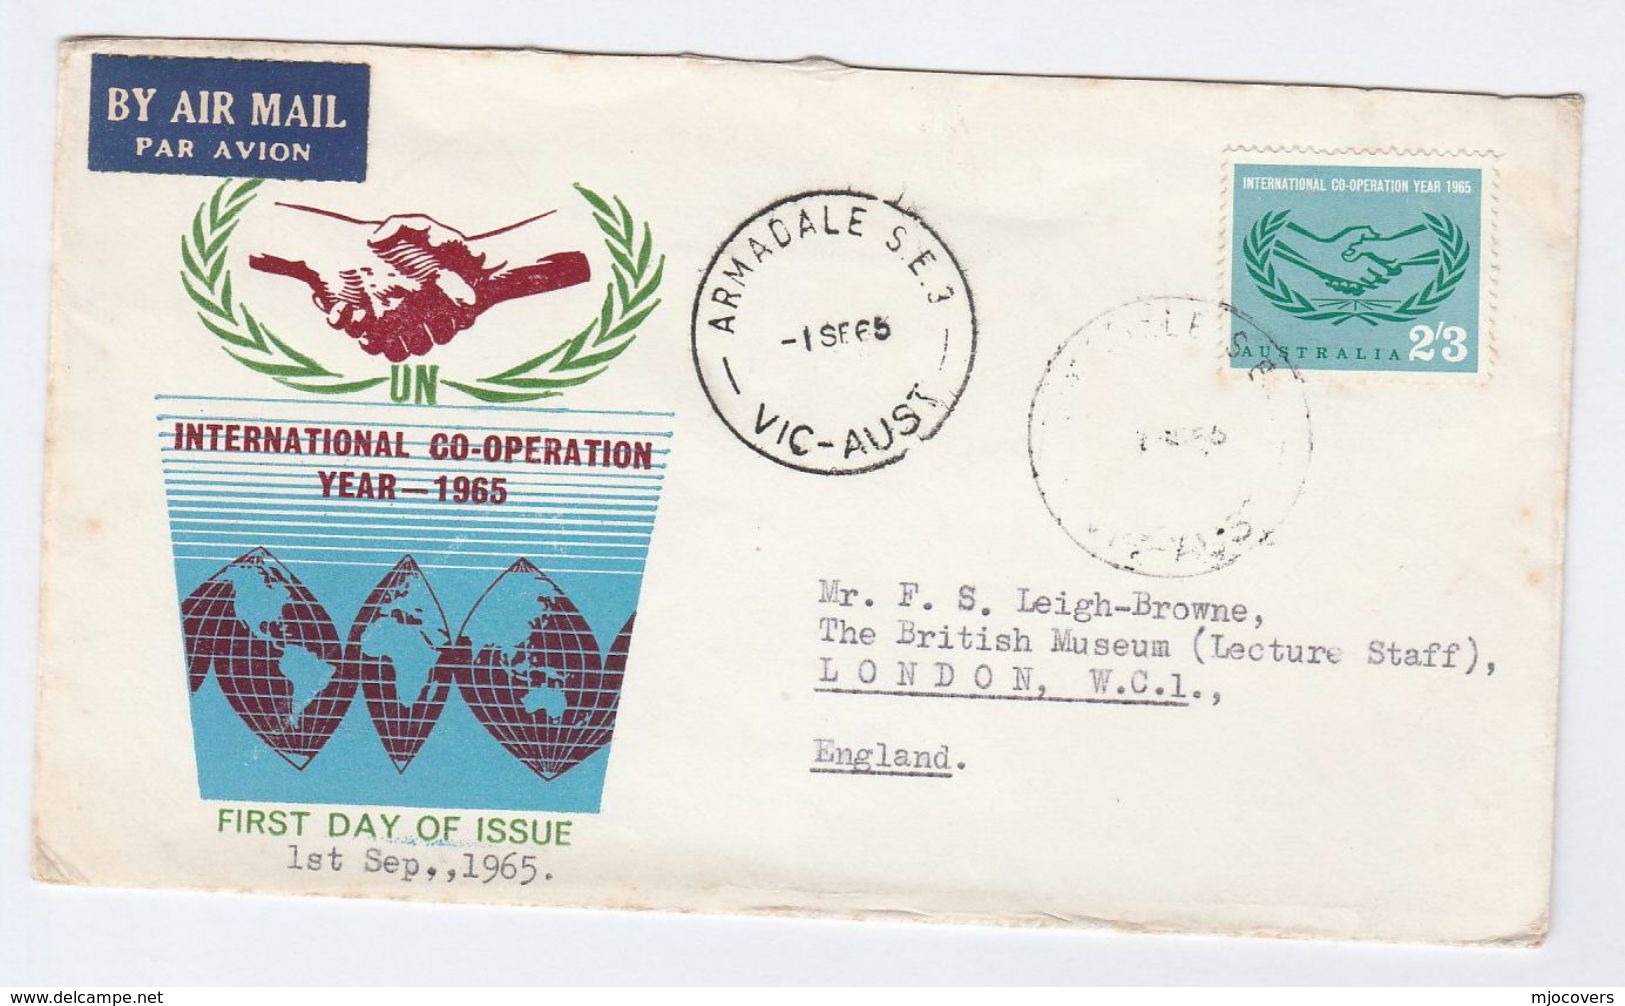 1965 Air Mail Armadale AUSTRALIA FDC 2/3 International Cooperation Year To GB  Un United Nations Airmail Label Cover - FDC